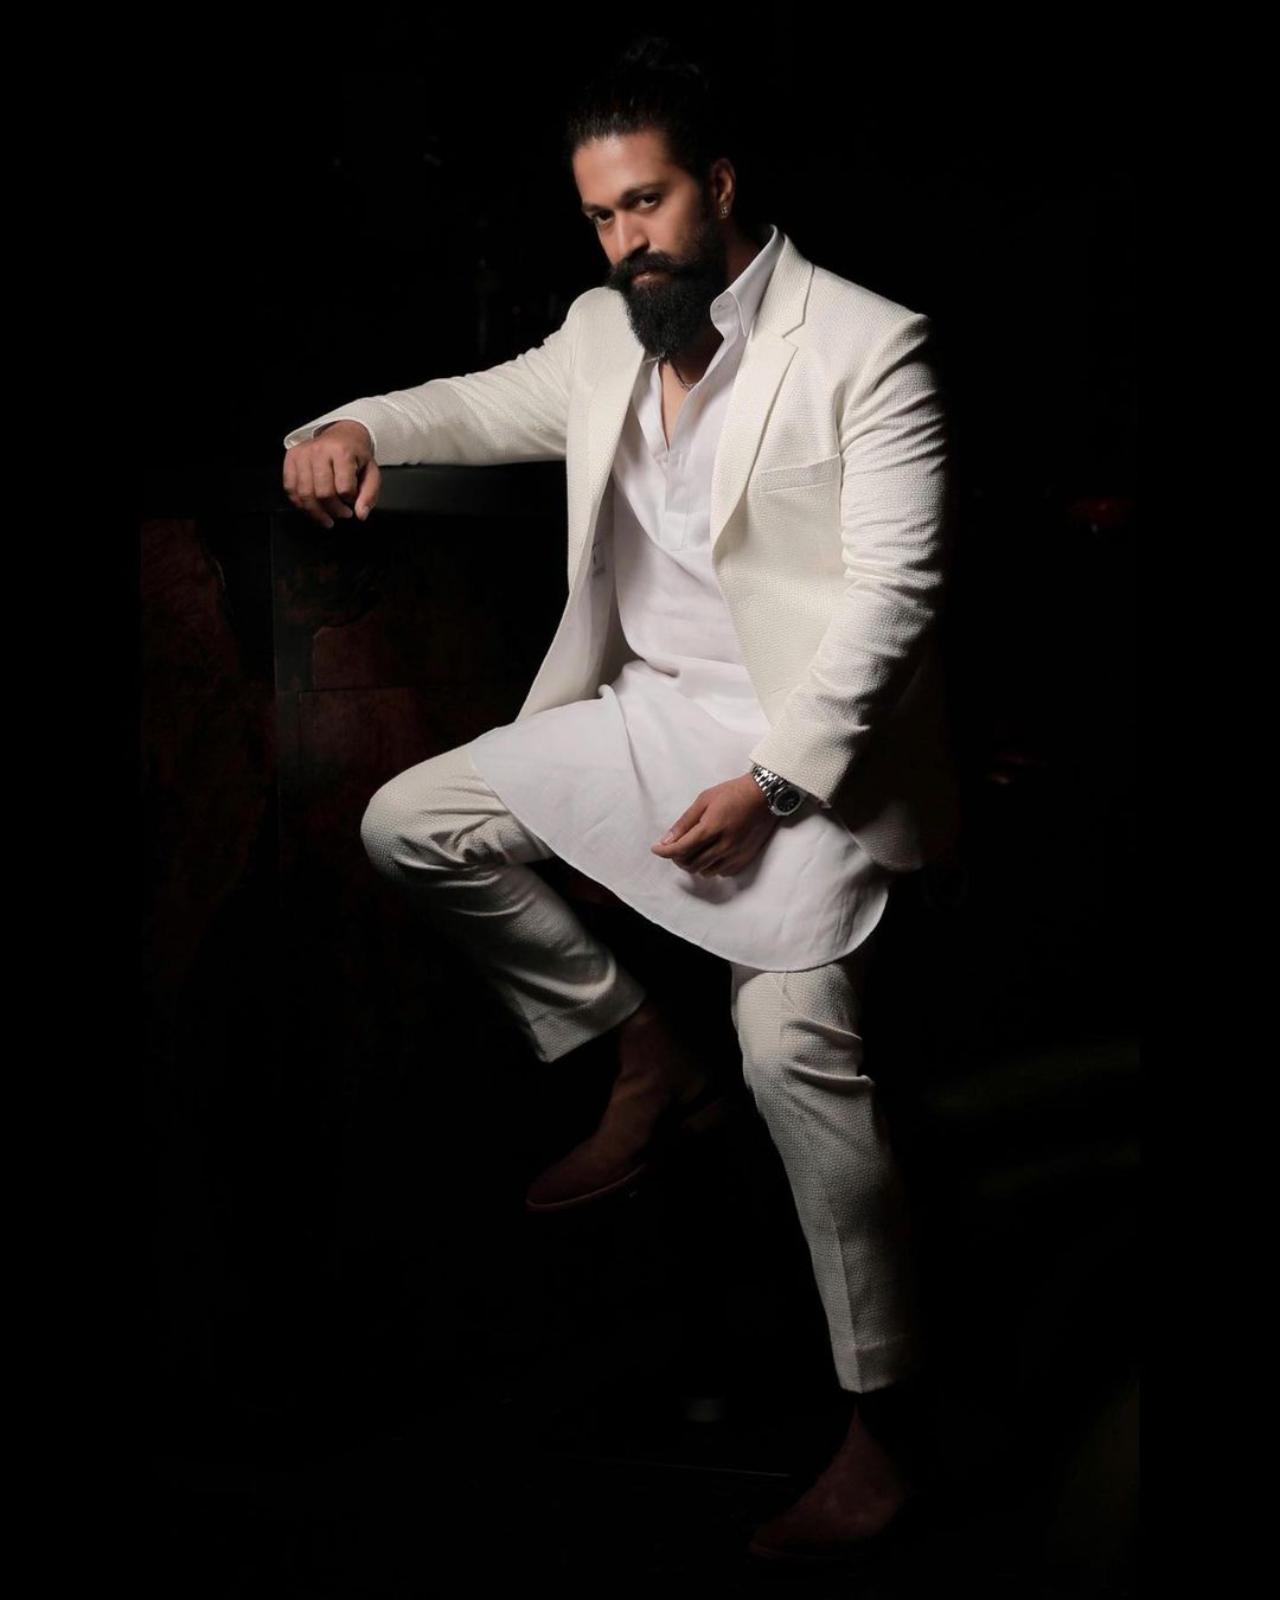 The 'K.G.F.: Chapter 2' star exuded class and confidence in this all-white look. He made an interesting fusion of fashion choices as he combined an off-white blazer and pants with a white kurta, instead of the more commonly worn t-shirt. His brown shoes added a nice little pop of colour to the overall outfit